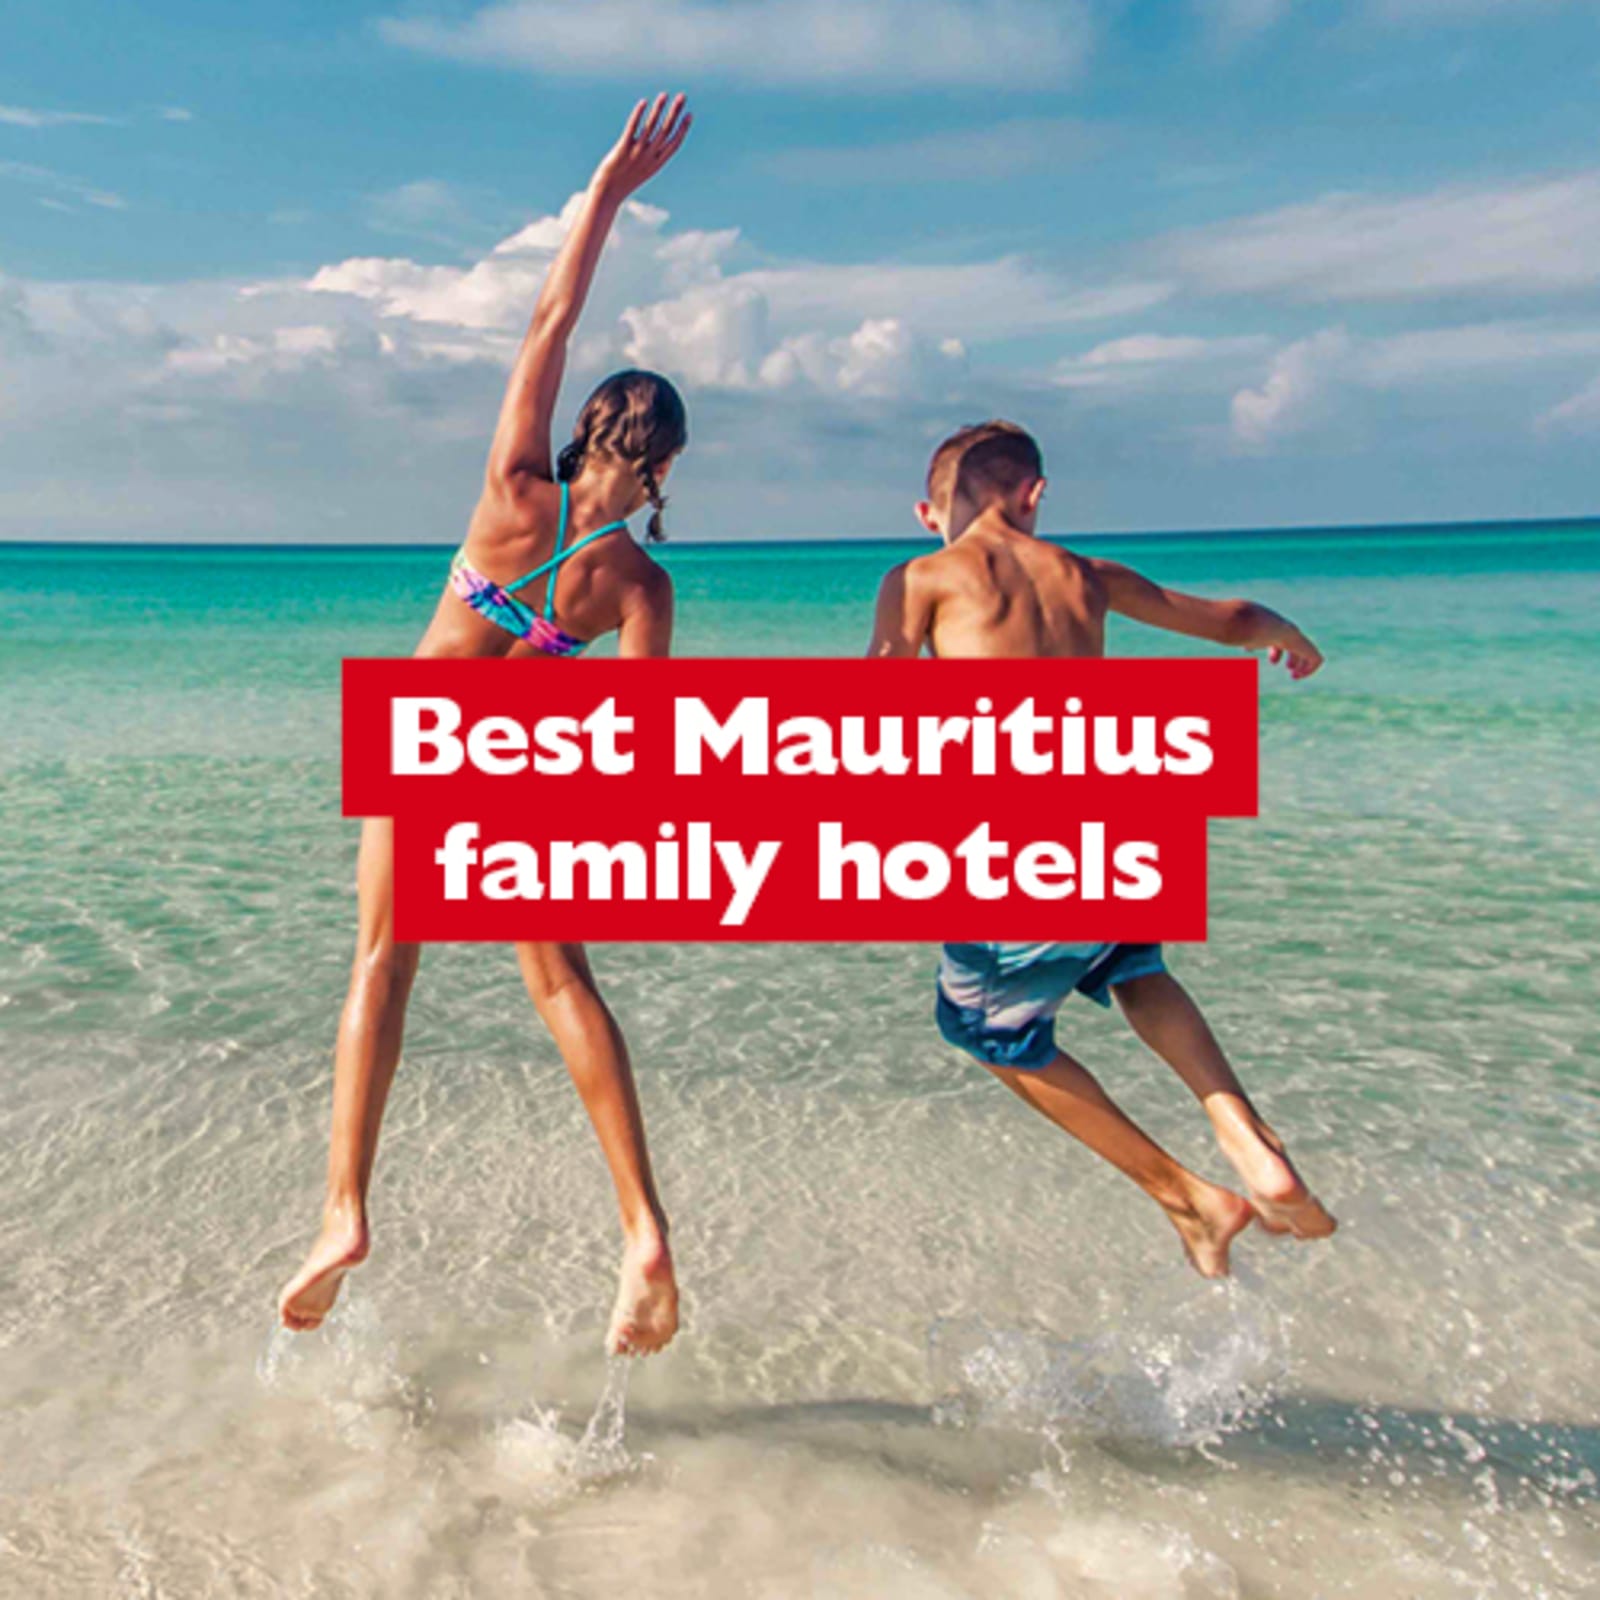 Best Mauritius family hotels